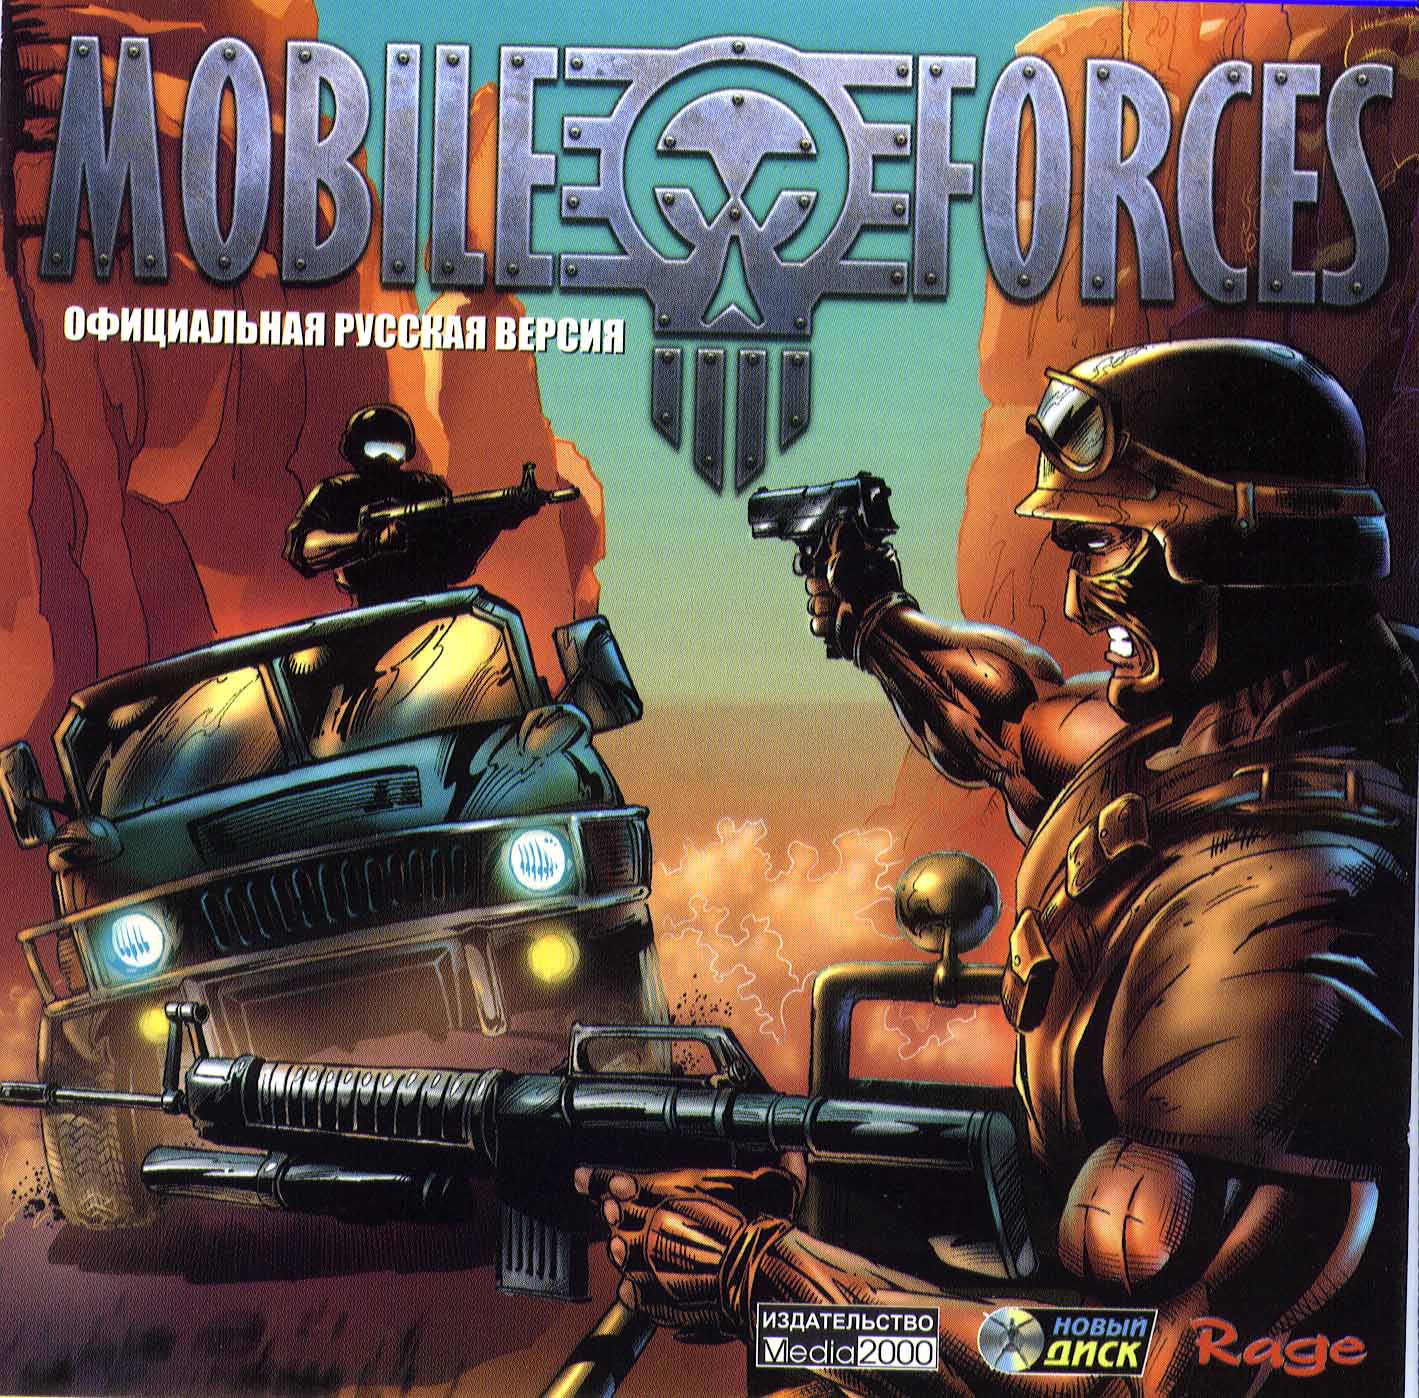 Mobile forces steam фото 8